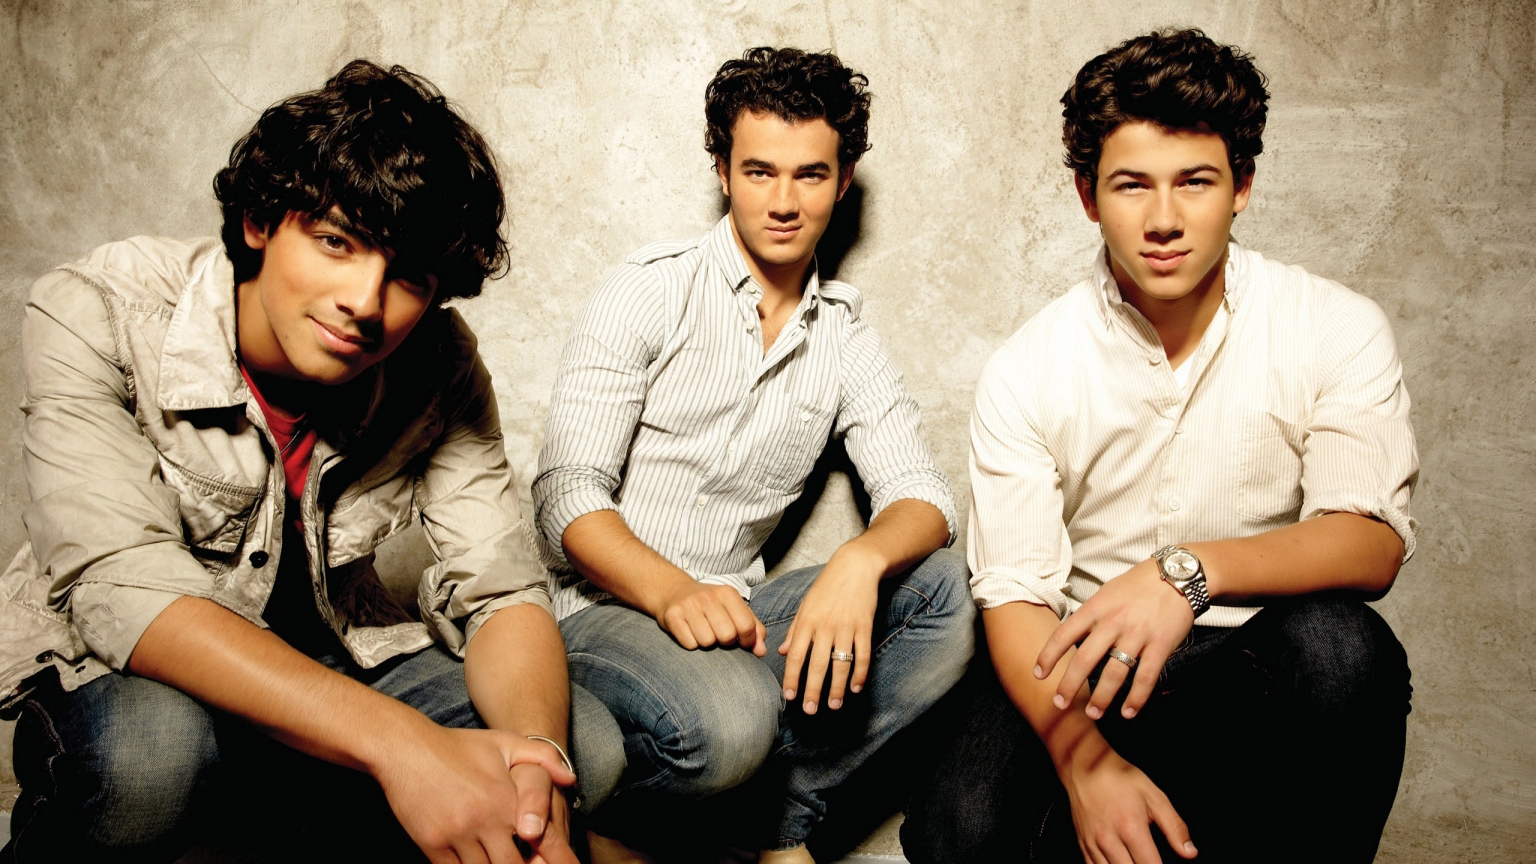 Cool Jonas Brothers for 1536 x 864 HDTV resolution